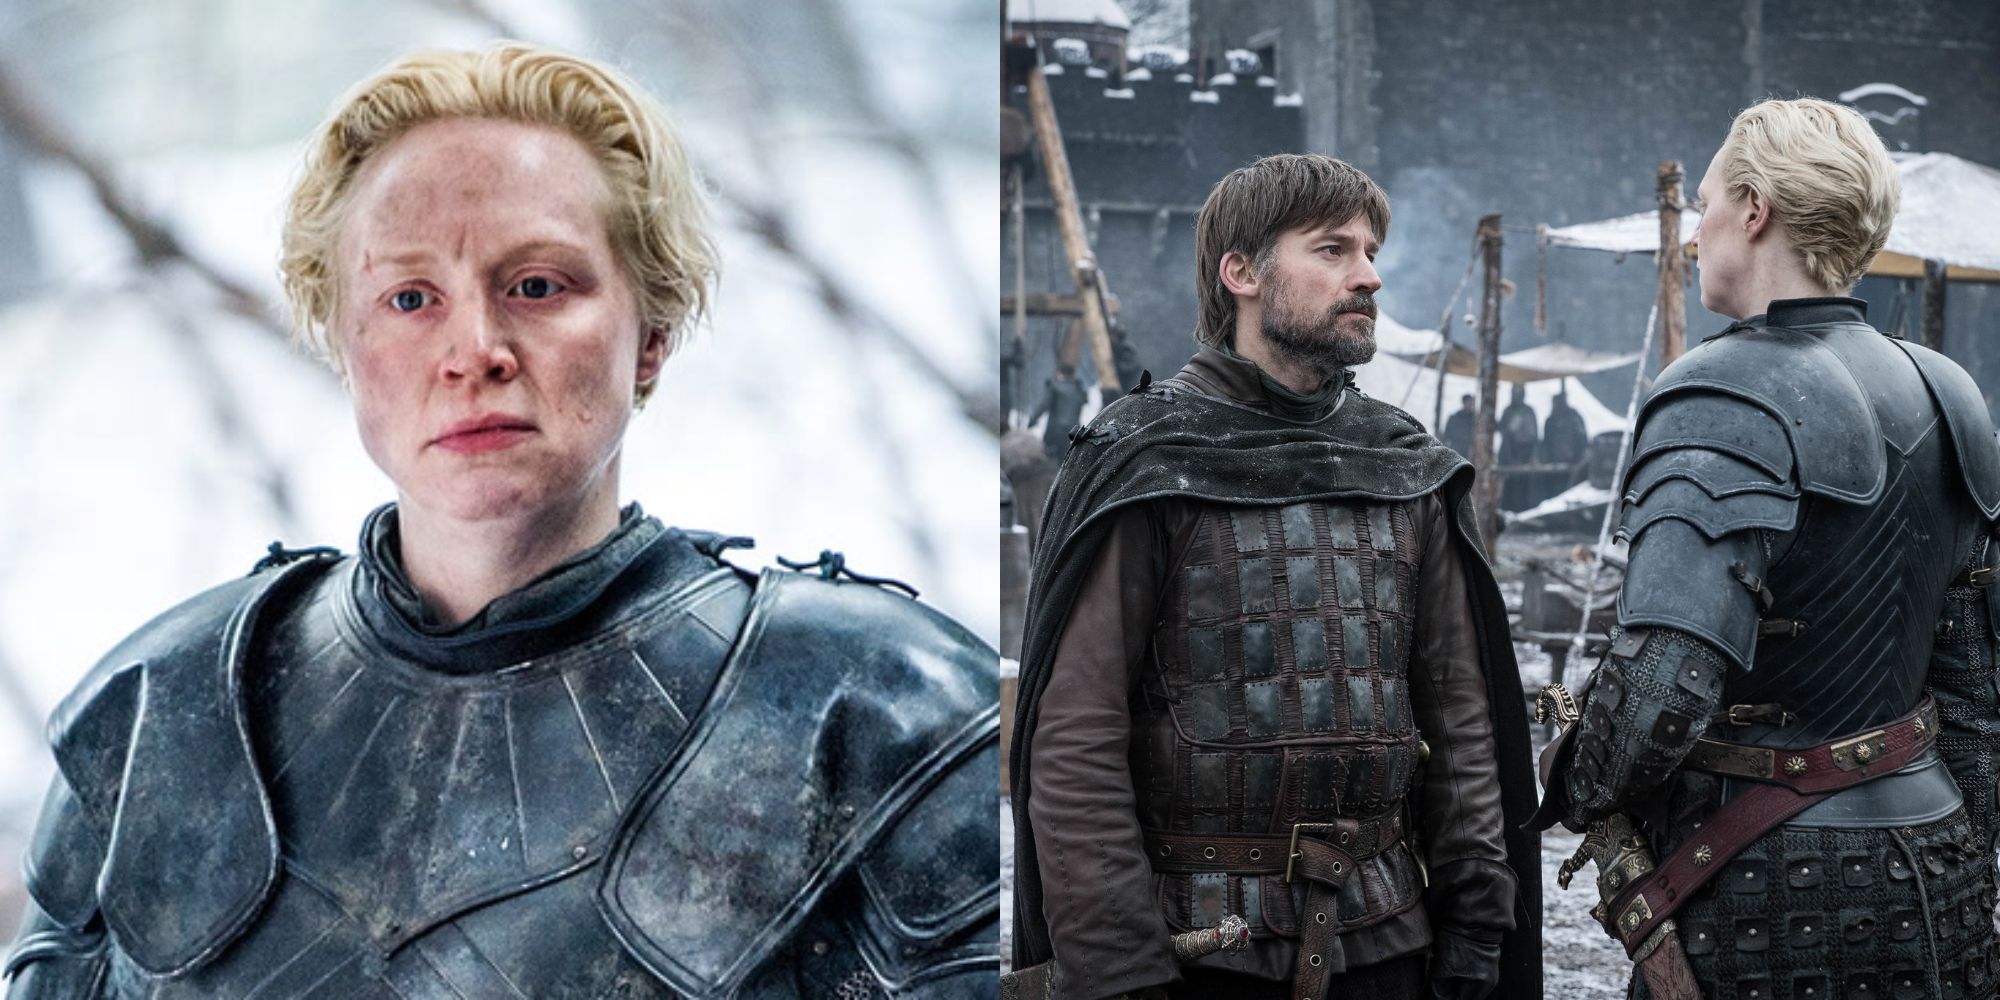 Split image showing Brienne of Tarth alone and with Jaime Lannister in Game of Thrones